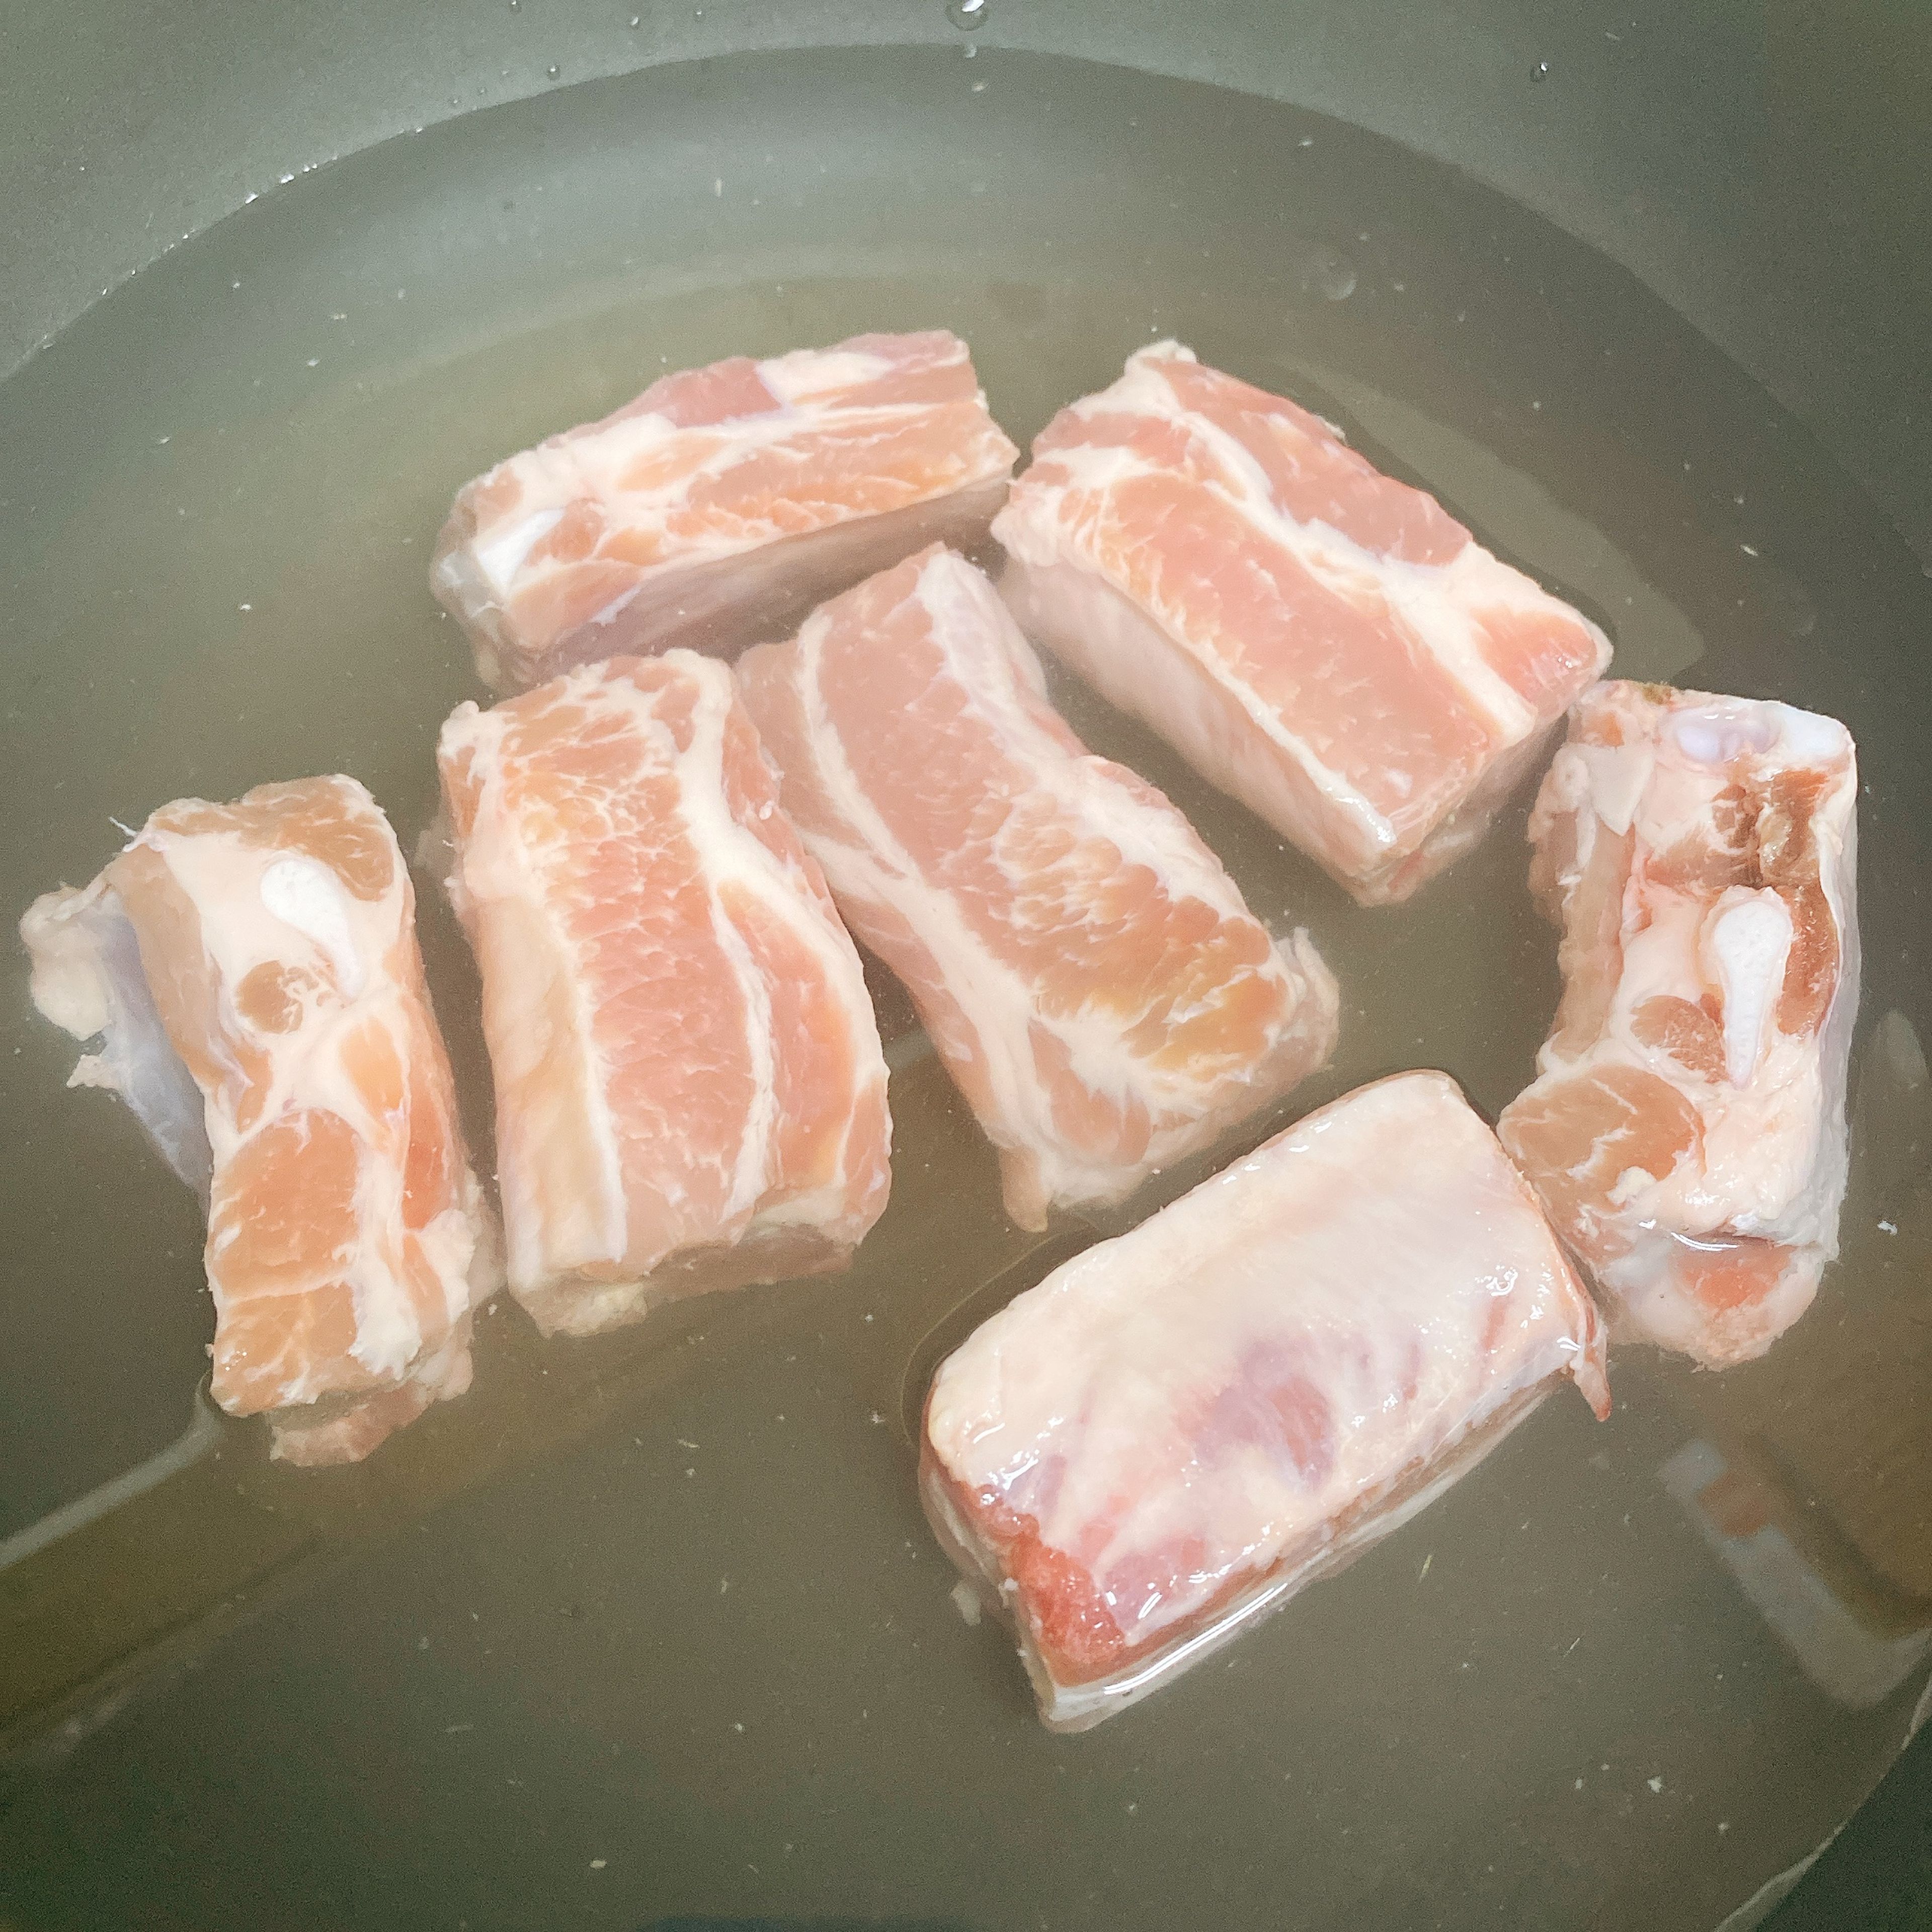 Fully submerge the ribs in cold water. Add cooking wine and boil the water. *Cooking wine is useful in getting rid of the rancid taste of meat.